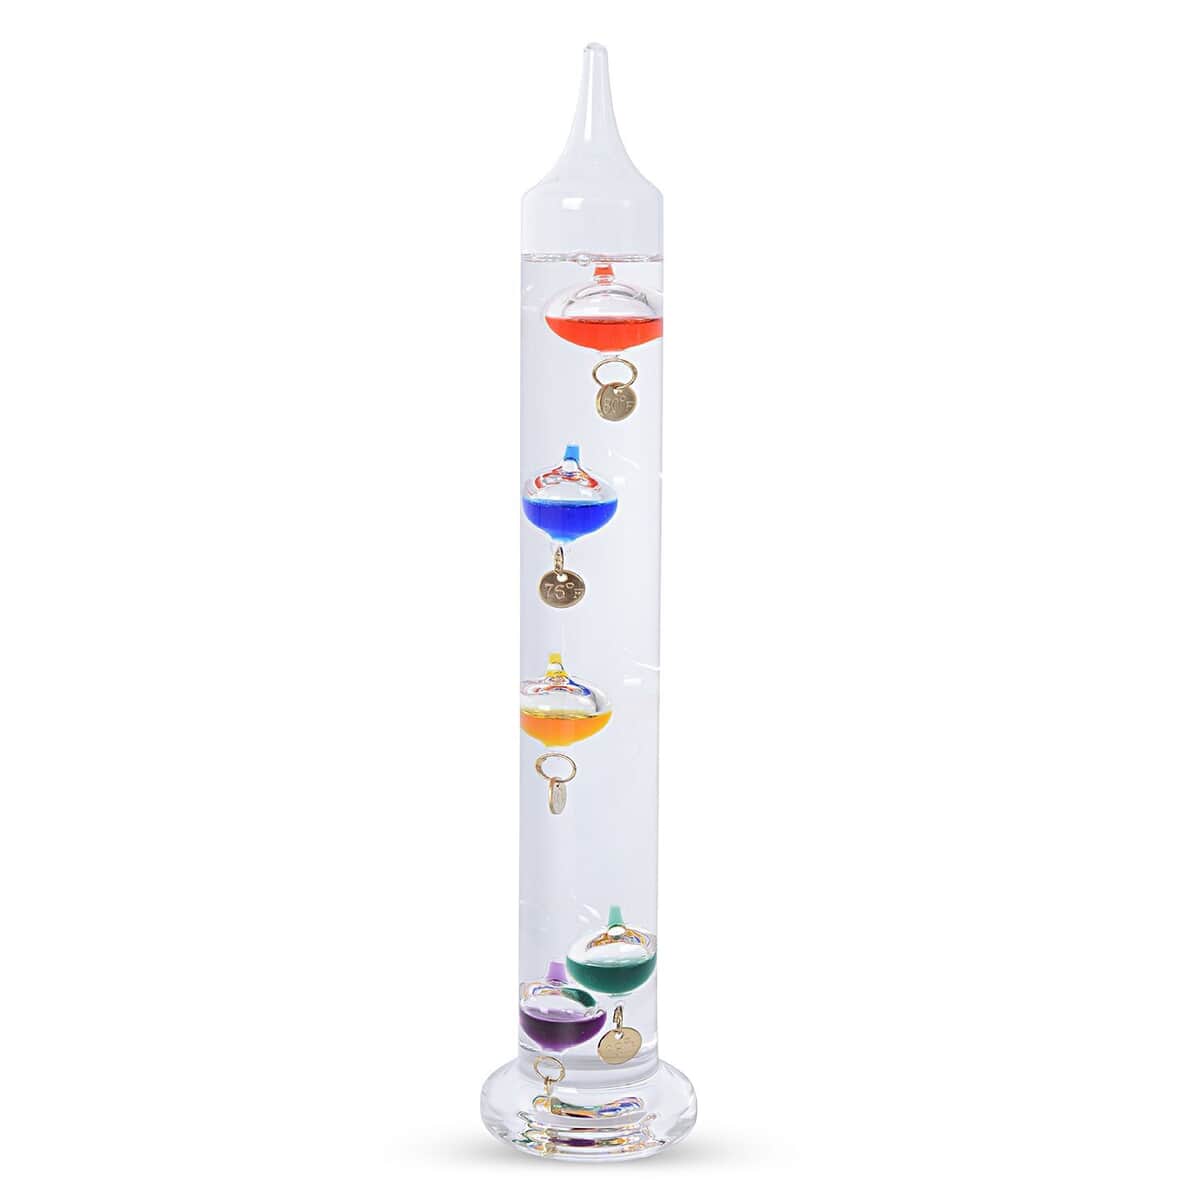 Multicolor Galileo Thermometer with Floating Balls, Weather Predictor Office Home Desk Table Decor, Indoor Decorations Gifts image number 0